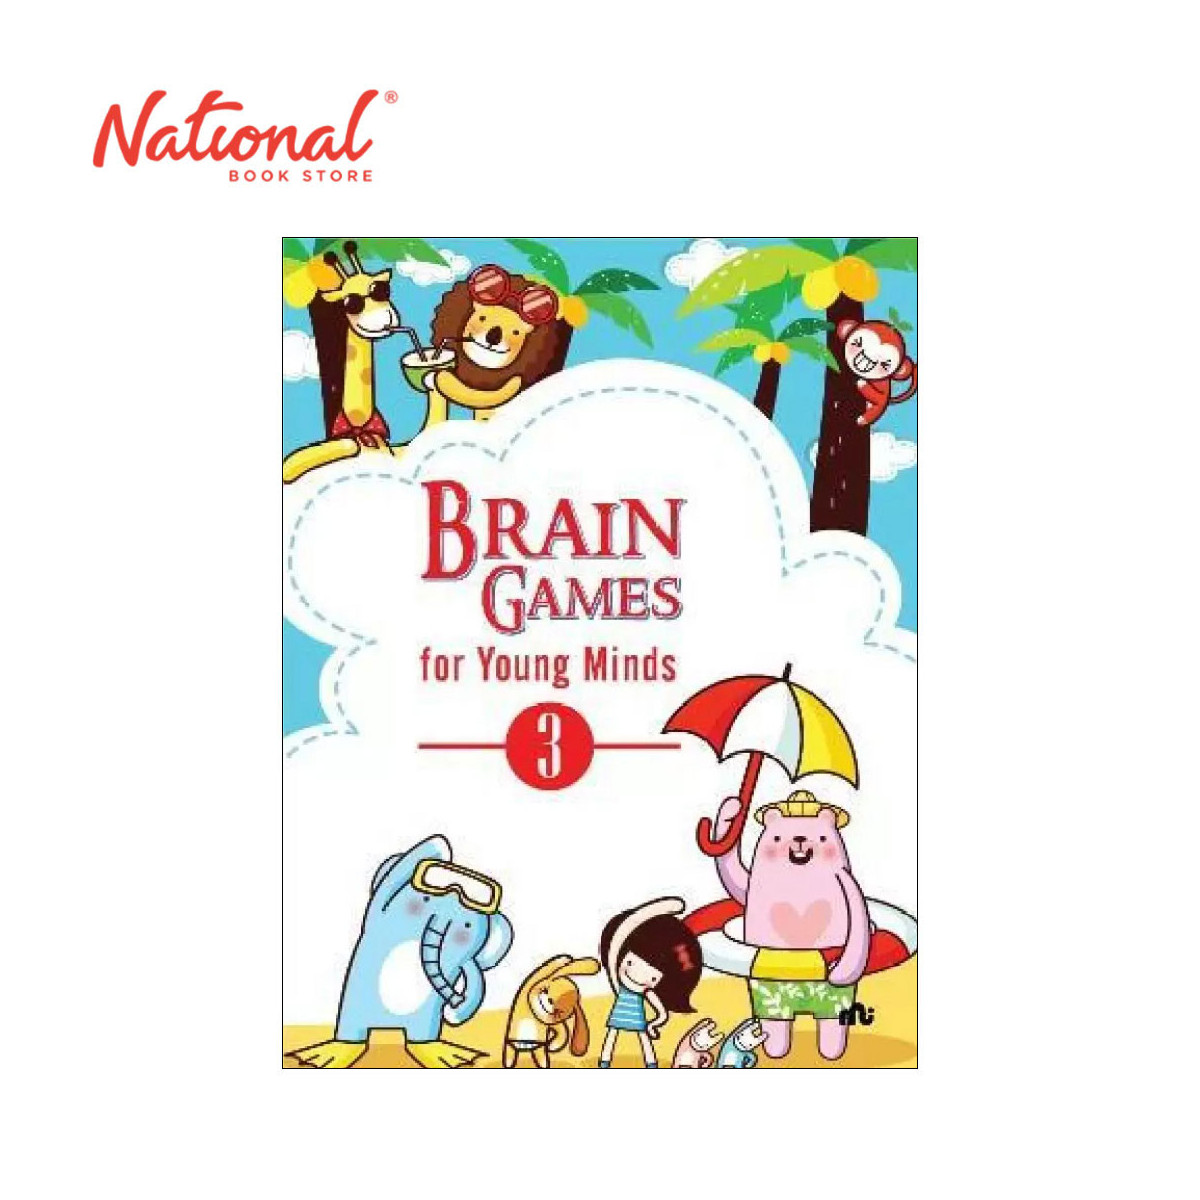 Brain Games For Young Minds 3 - Trade Paperback - Activity Books for Kids